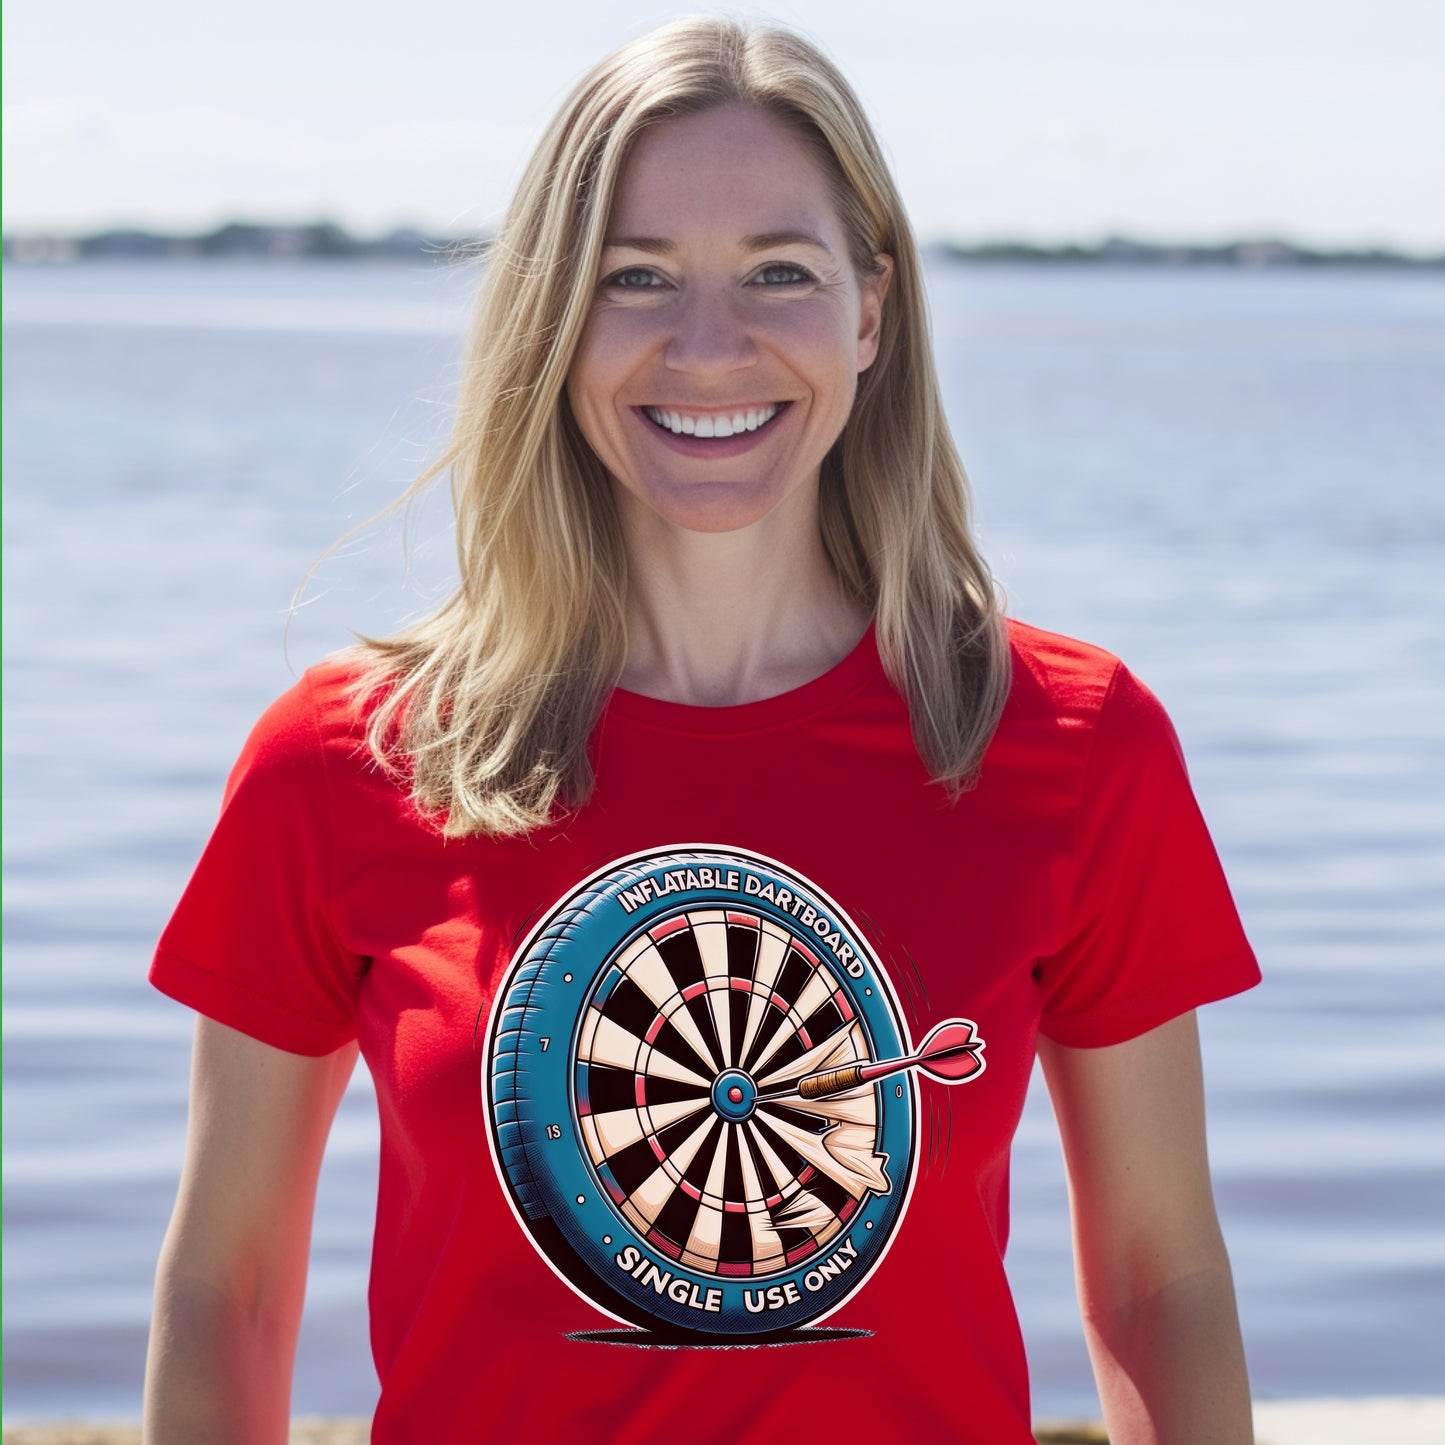 Inflatable Dartboard T-Shirt: Single Use Only - Failed Invention - Perfect for Party Games Enthusiasts and Lovers of Funny T-Shirts